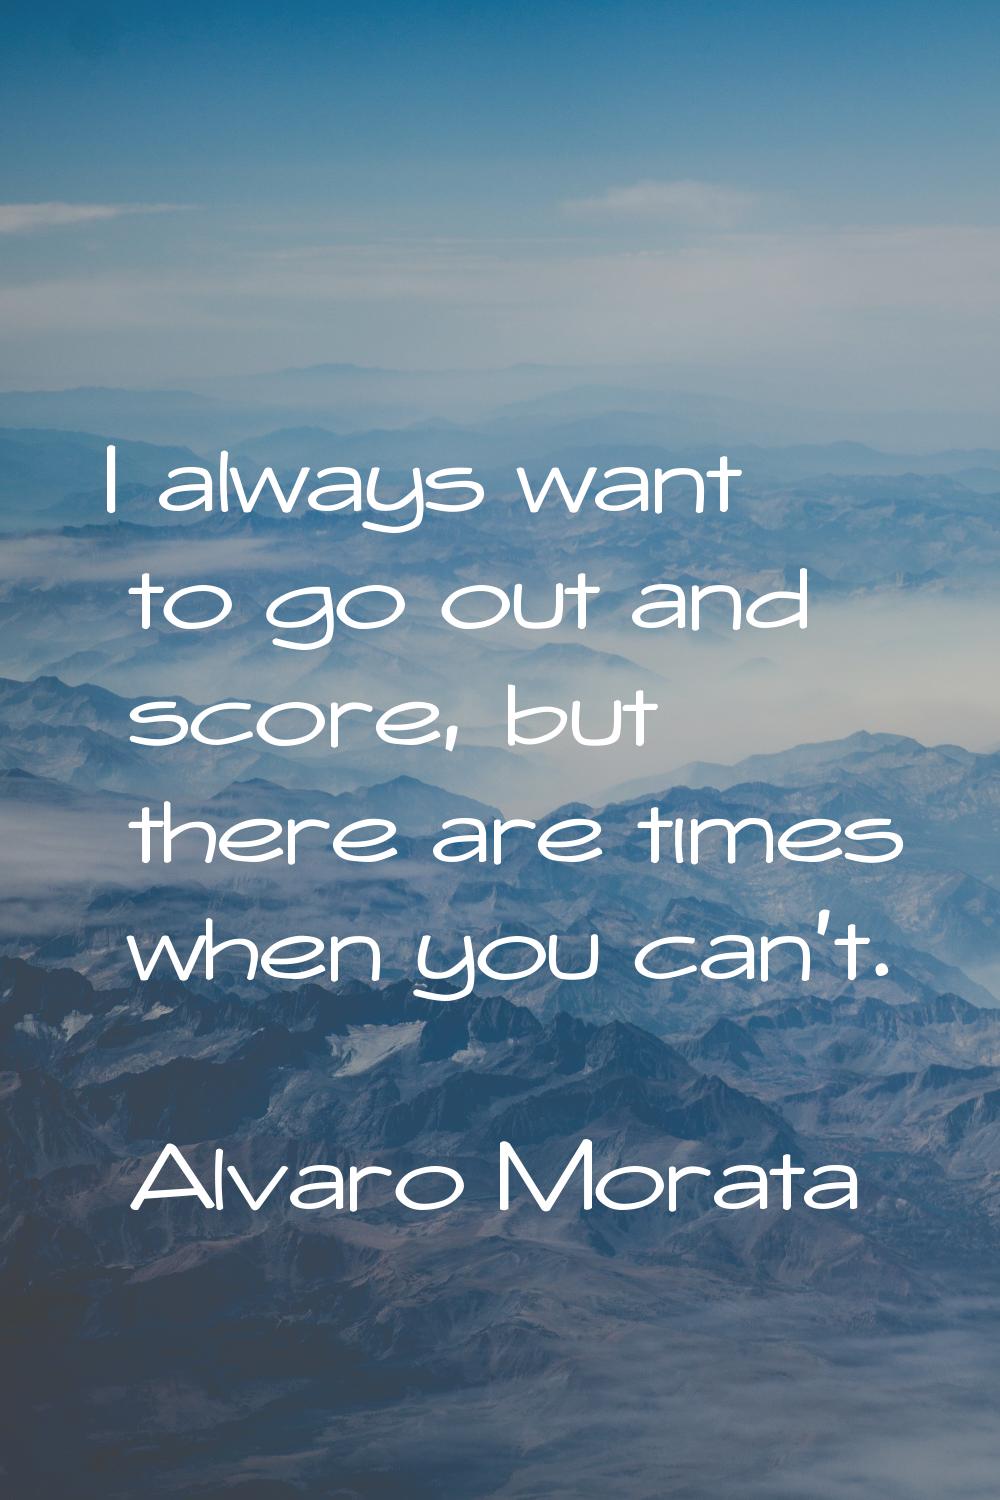 I always want to go out and score, but there are times when you can't.